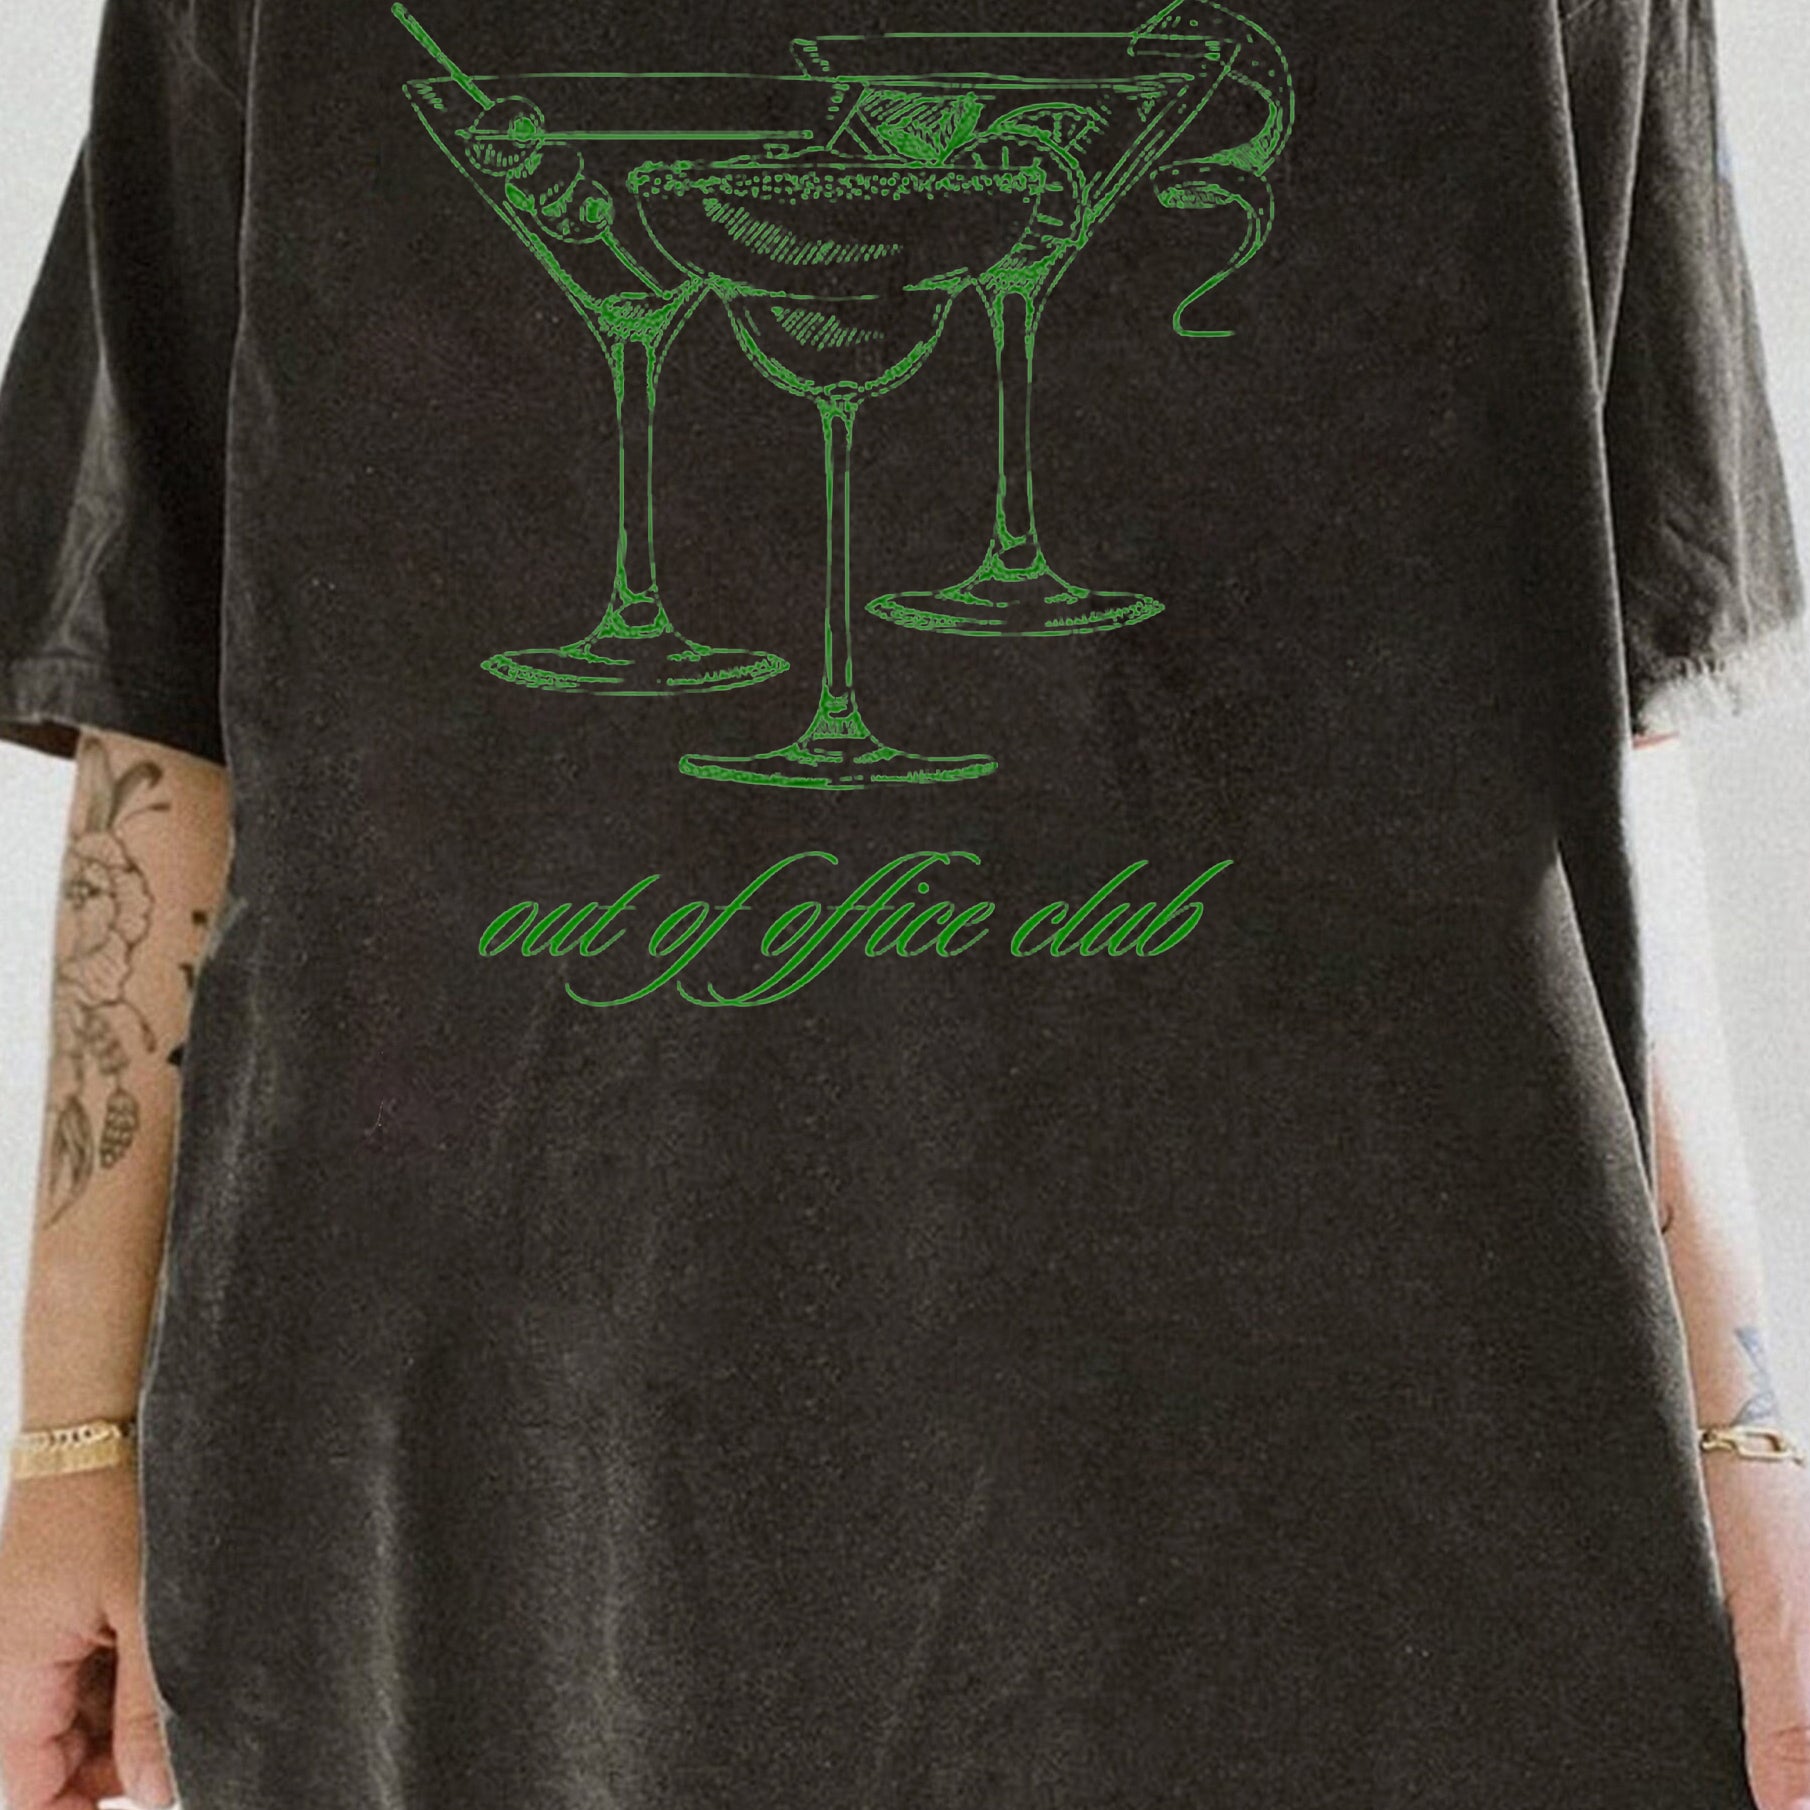 Out of Office Club Cocktail Drinks Tee For Women